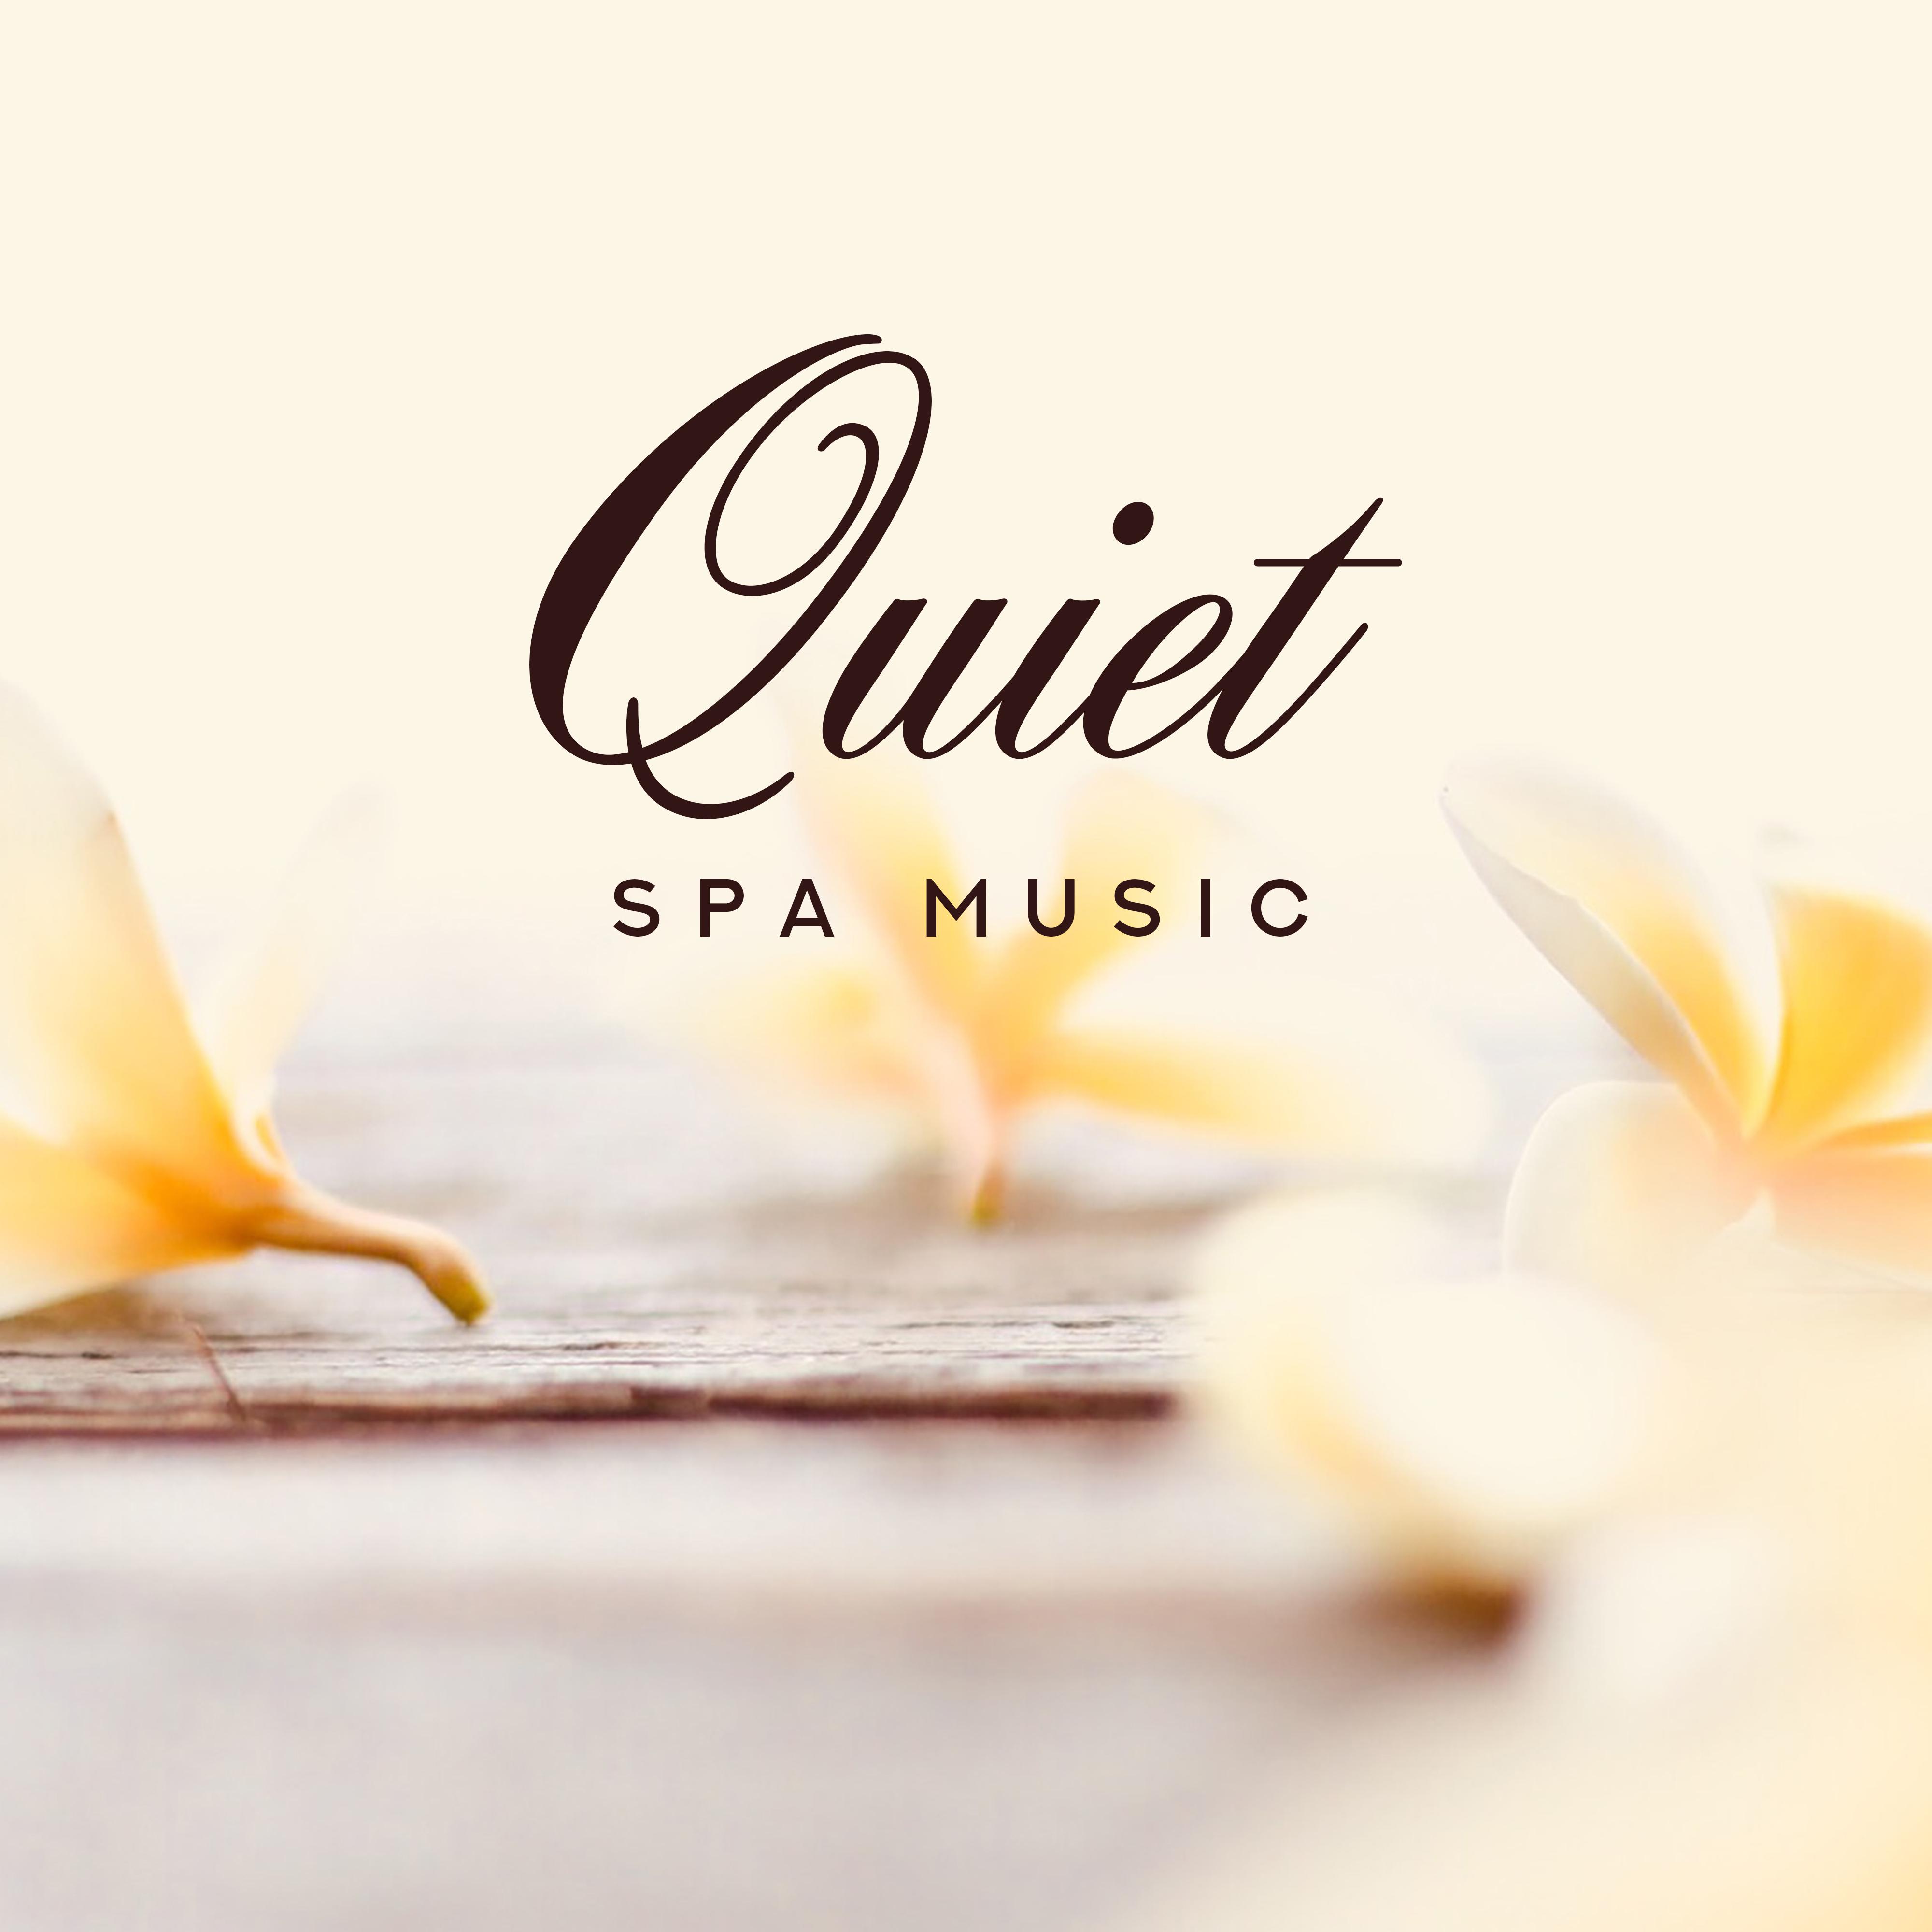 Quiet Spa Music: Gentle Melodies to Relax, Delicate Music for Massage and Relaxation Treatments, Calming Sounds for Relaxation, Soothing Tunes for Sleep